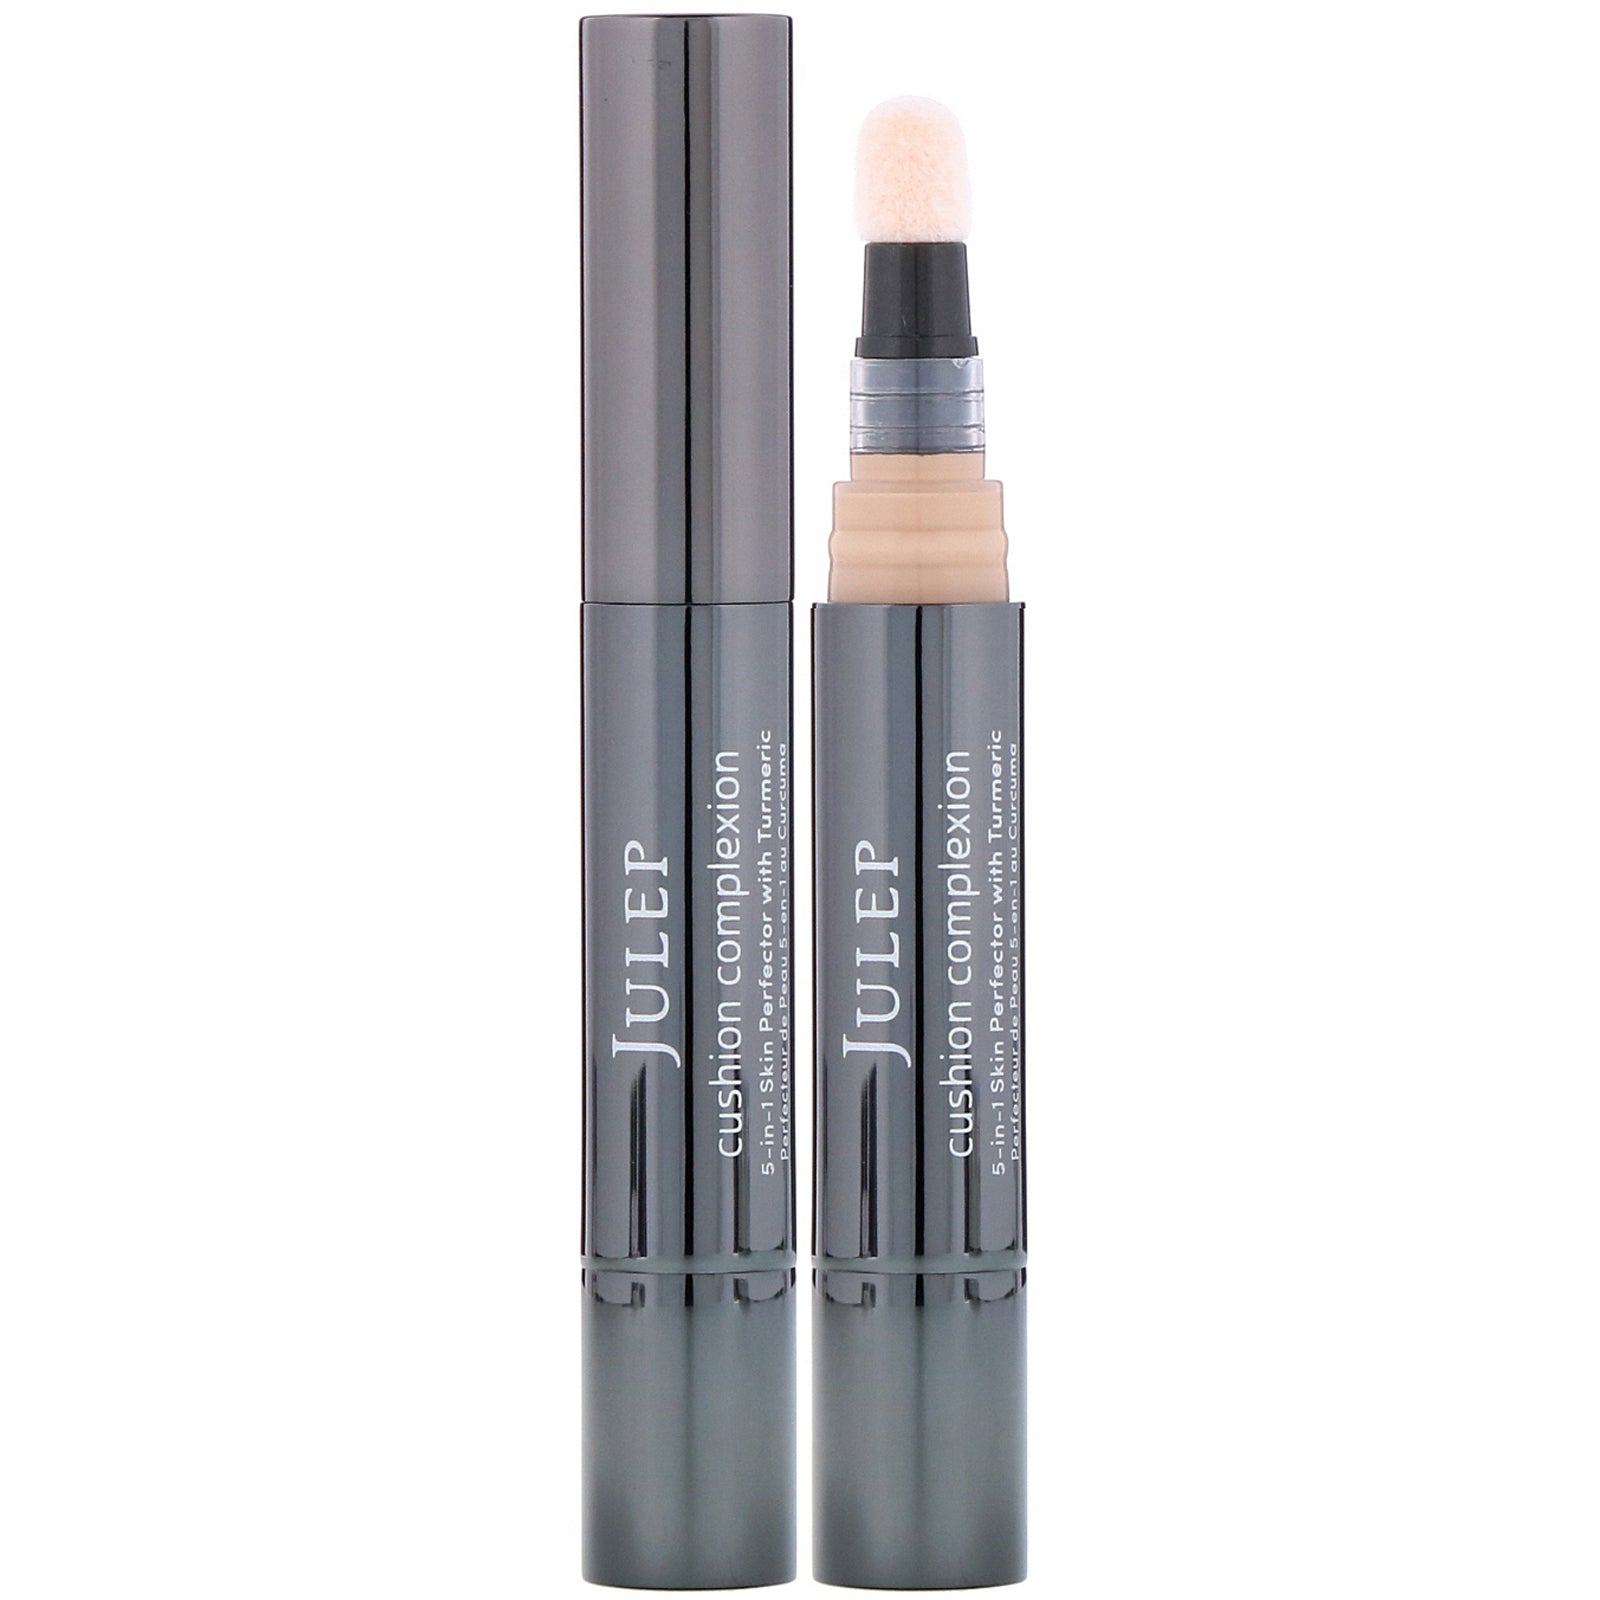 Julep, Cushion Complexion, 5-in-1 Skin Perfector with Turmeric, Cashmere, 0.16 oz (4.6 g)